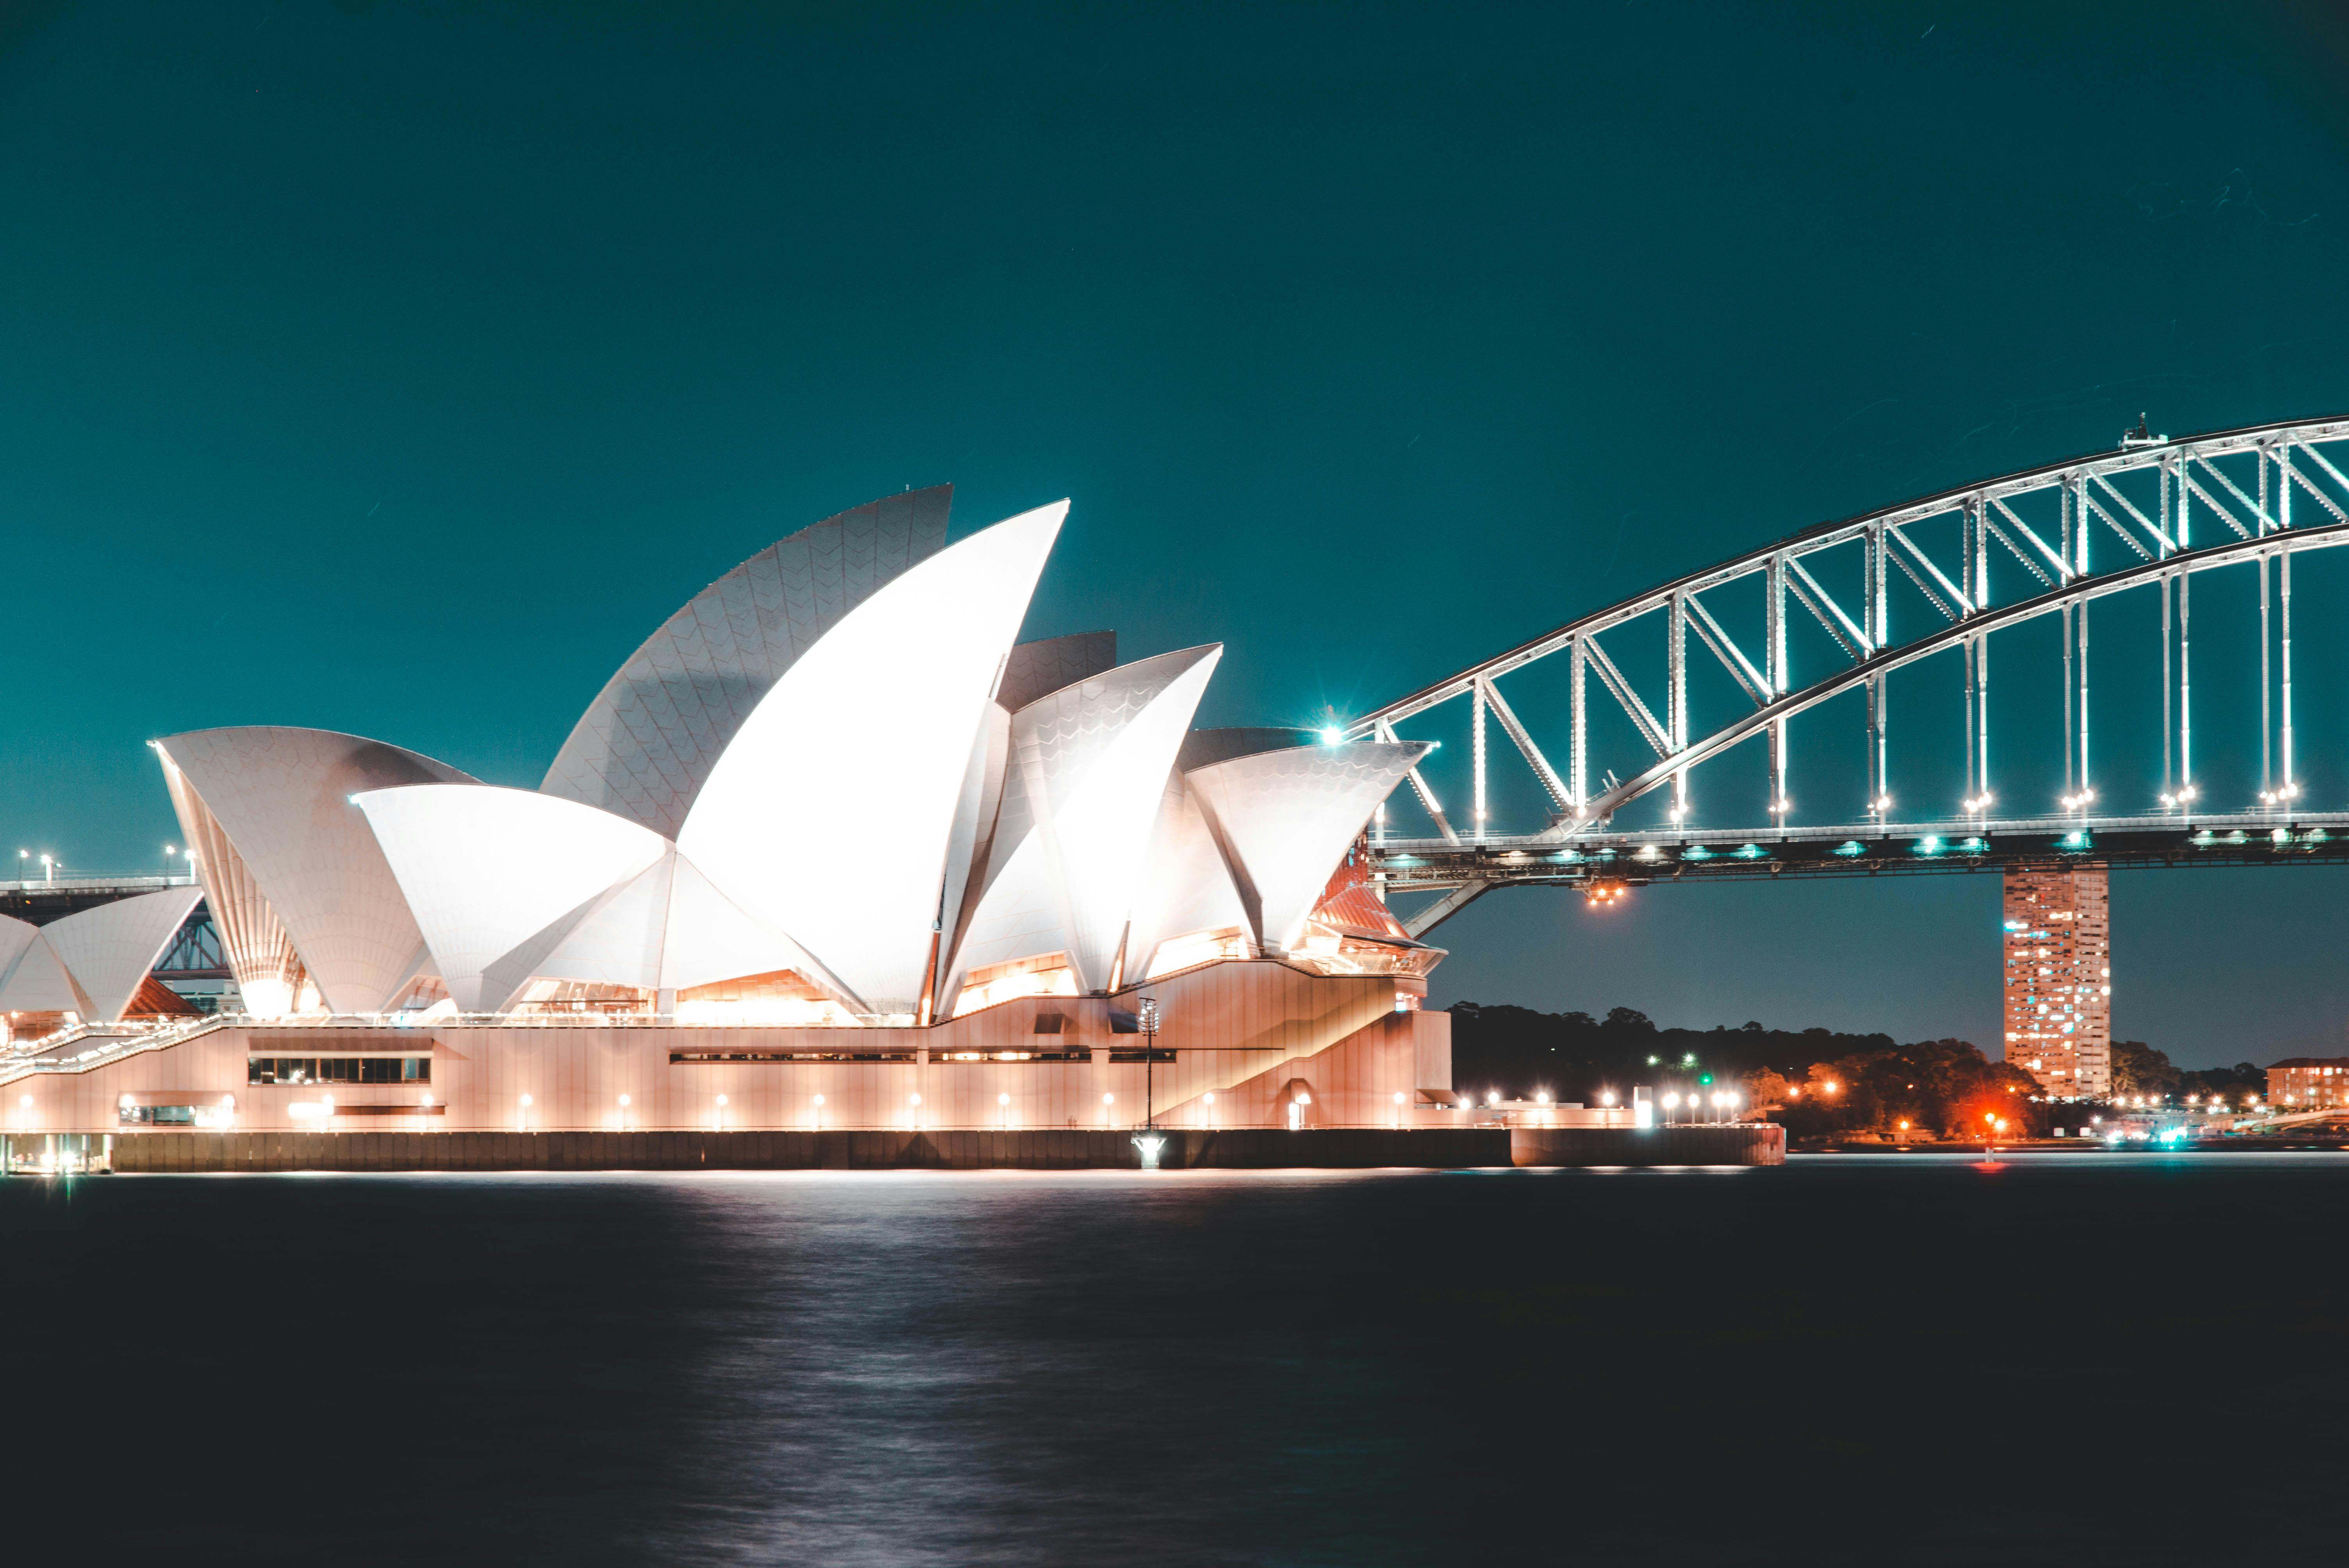 Photograph of the famous sydney opera house, as seen from the bay. Taken by photographer Rijan Hamidovic